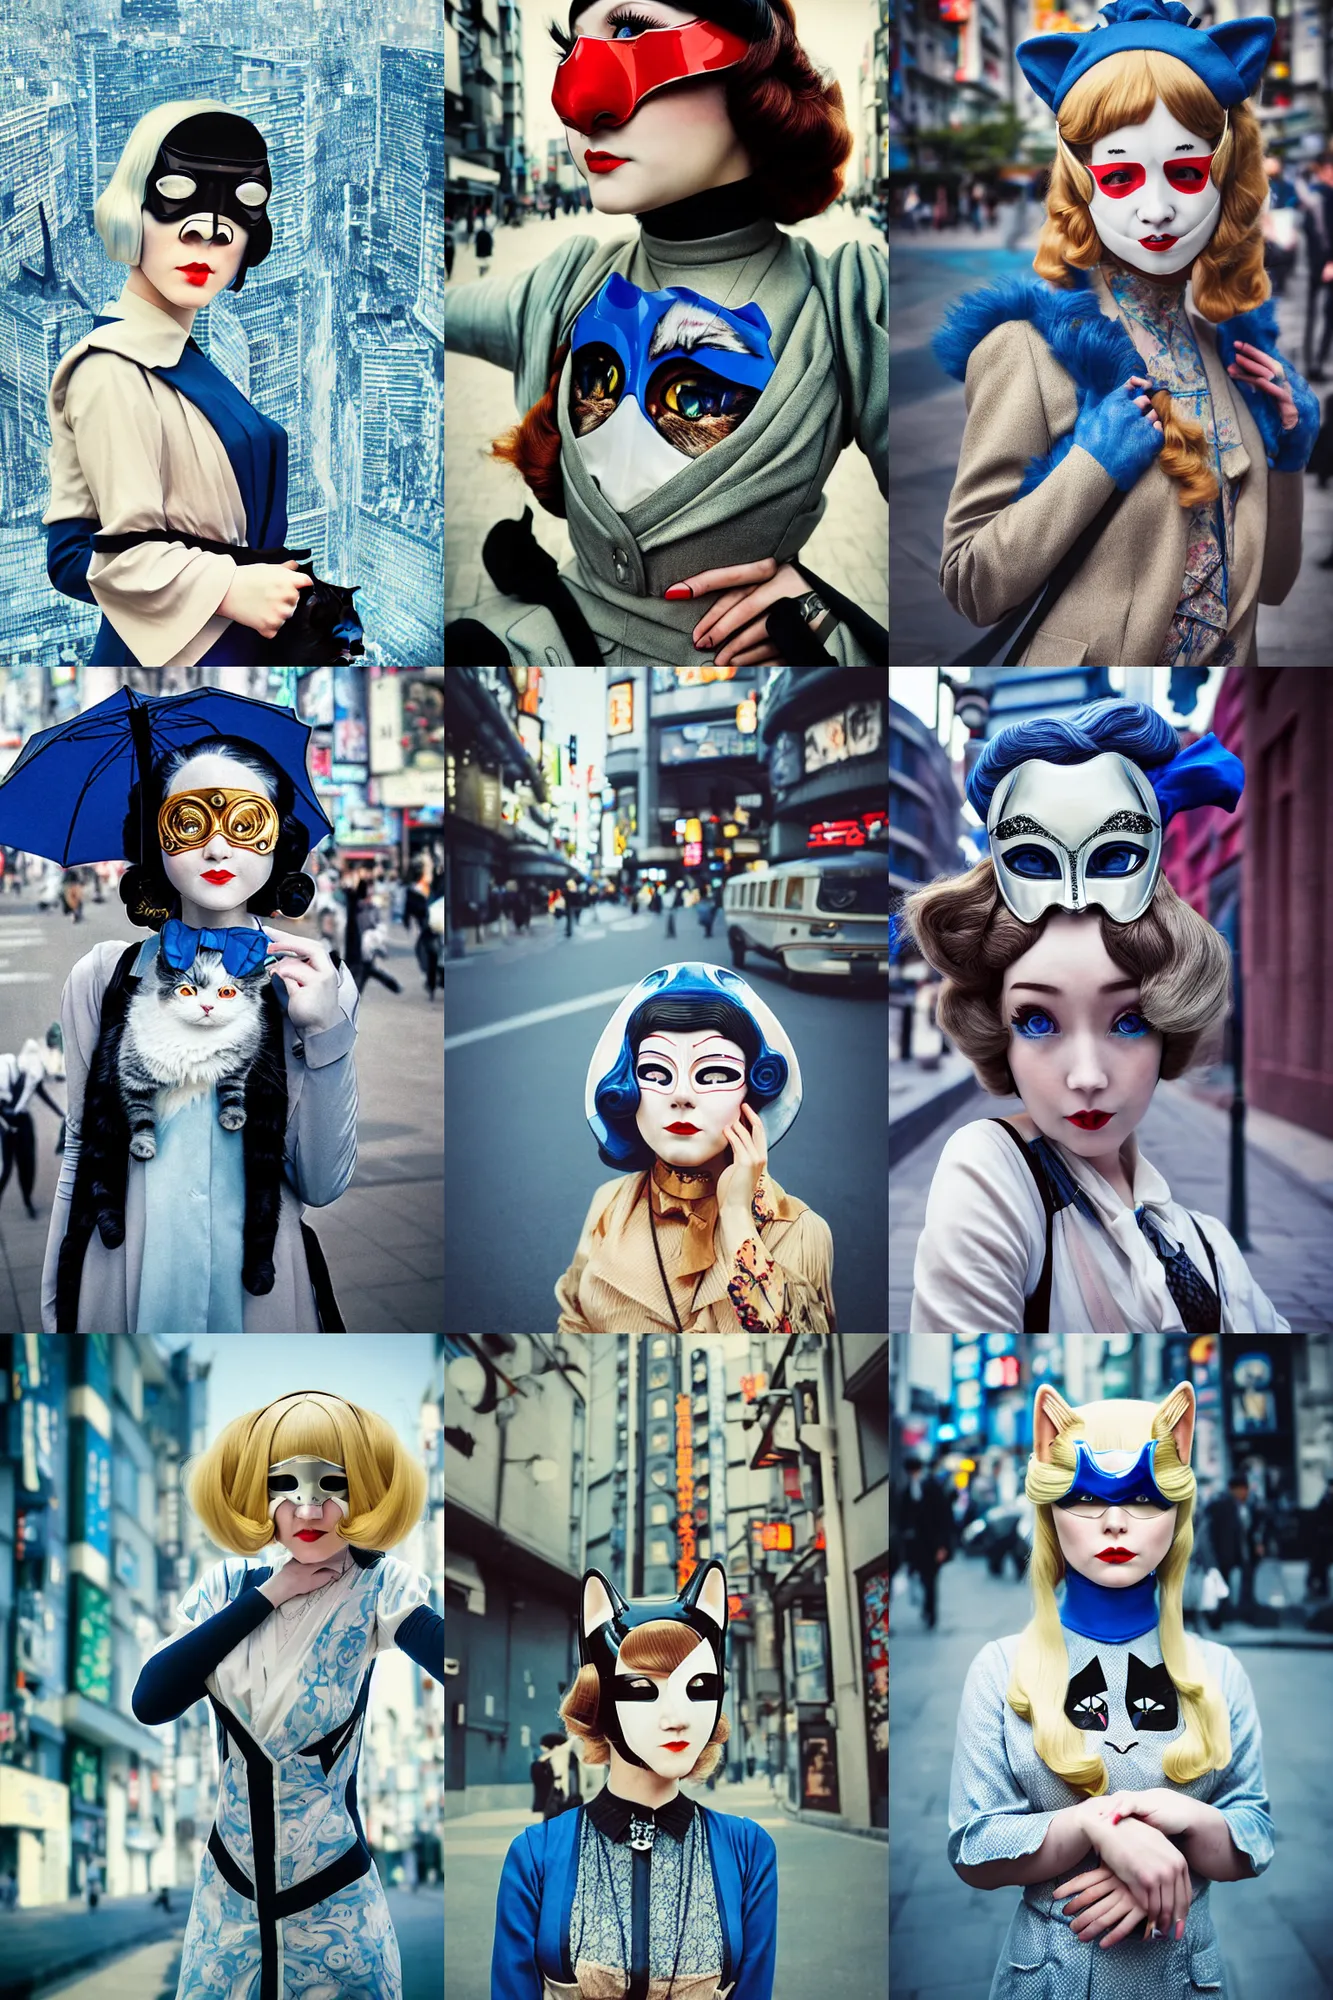 Prompt: \!Cinestill 50d! film photo,!8K!,highly detailed\: beautiful three point perspective extreme closeup portrait photo in style of 1920s frontiers in cosplay retrofuturism tokyo seinen manga street photography fashion edition, tilt shift zaha hadid style tokyo background, highly detailed, focus on girl;art nouveau cat mask;blonde hair;blue eyes, clear eyes, soft lighting